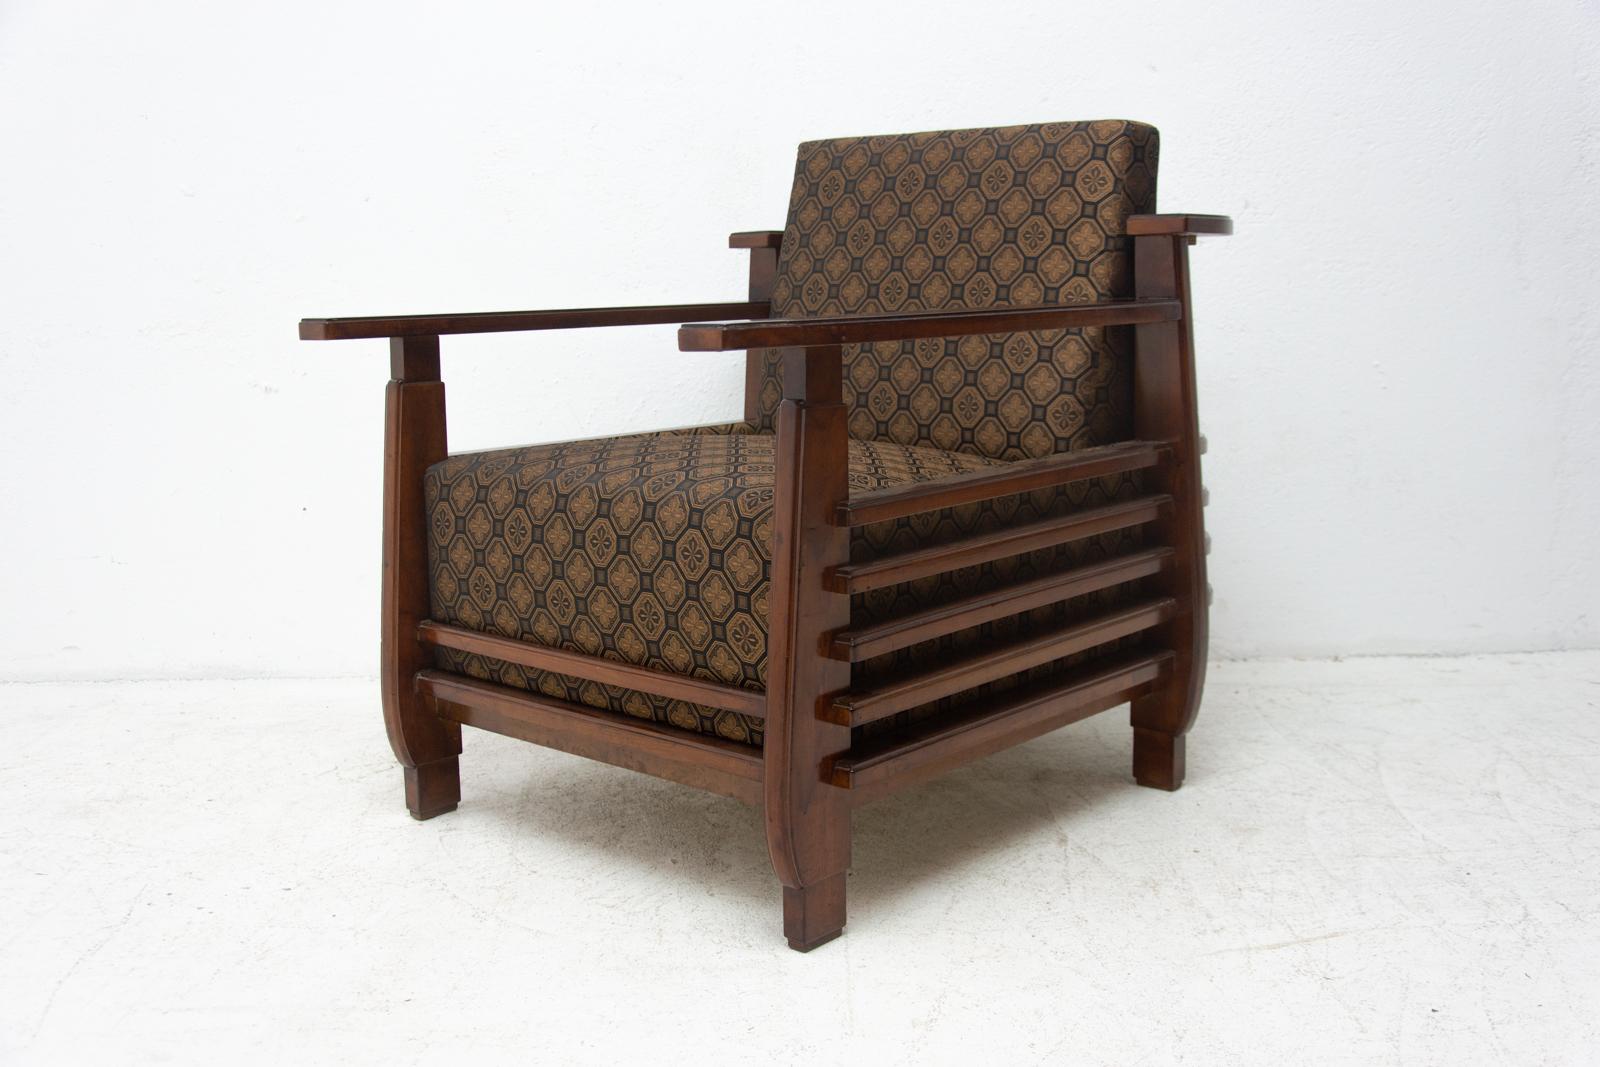 Pair of Fully Restored Functionalist Armchairs, 1930s, Austria, Bauhaus Period For Sale 8